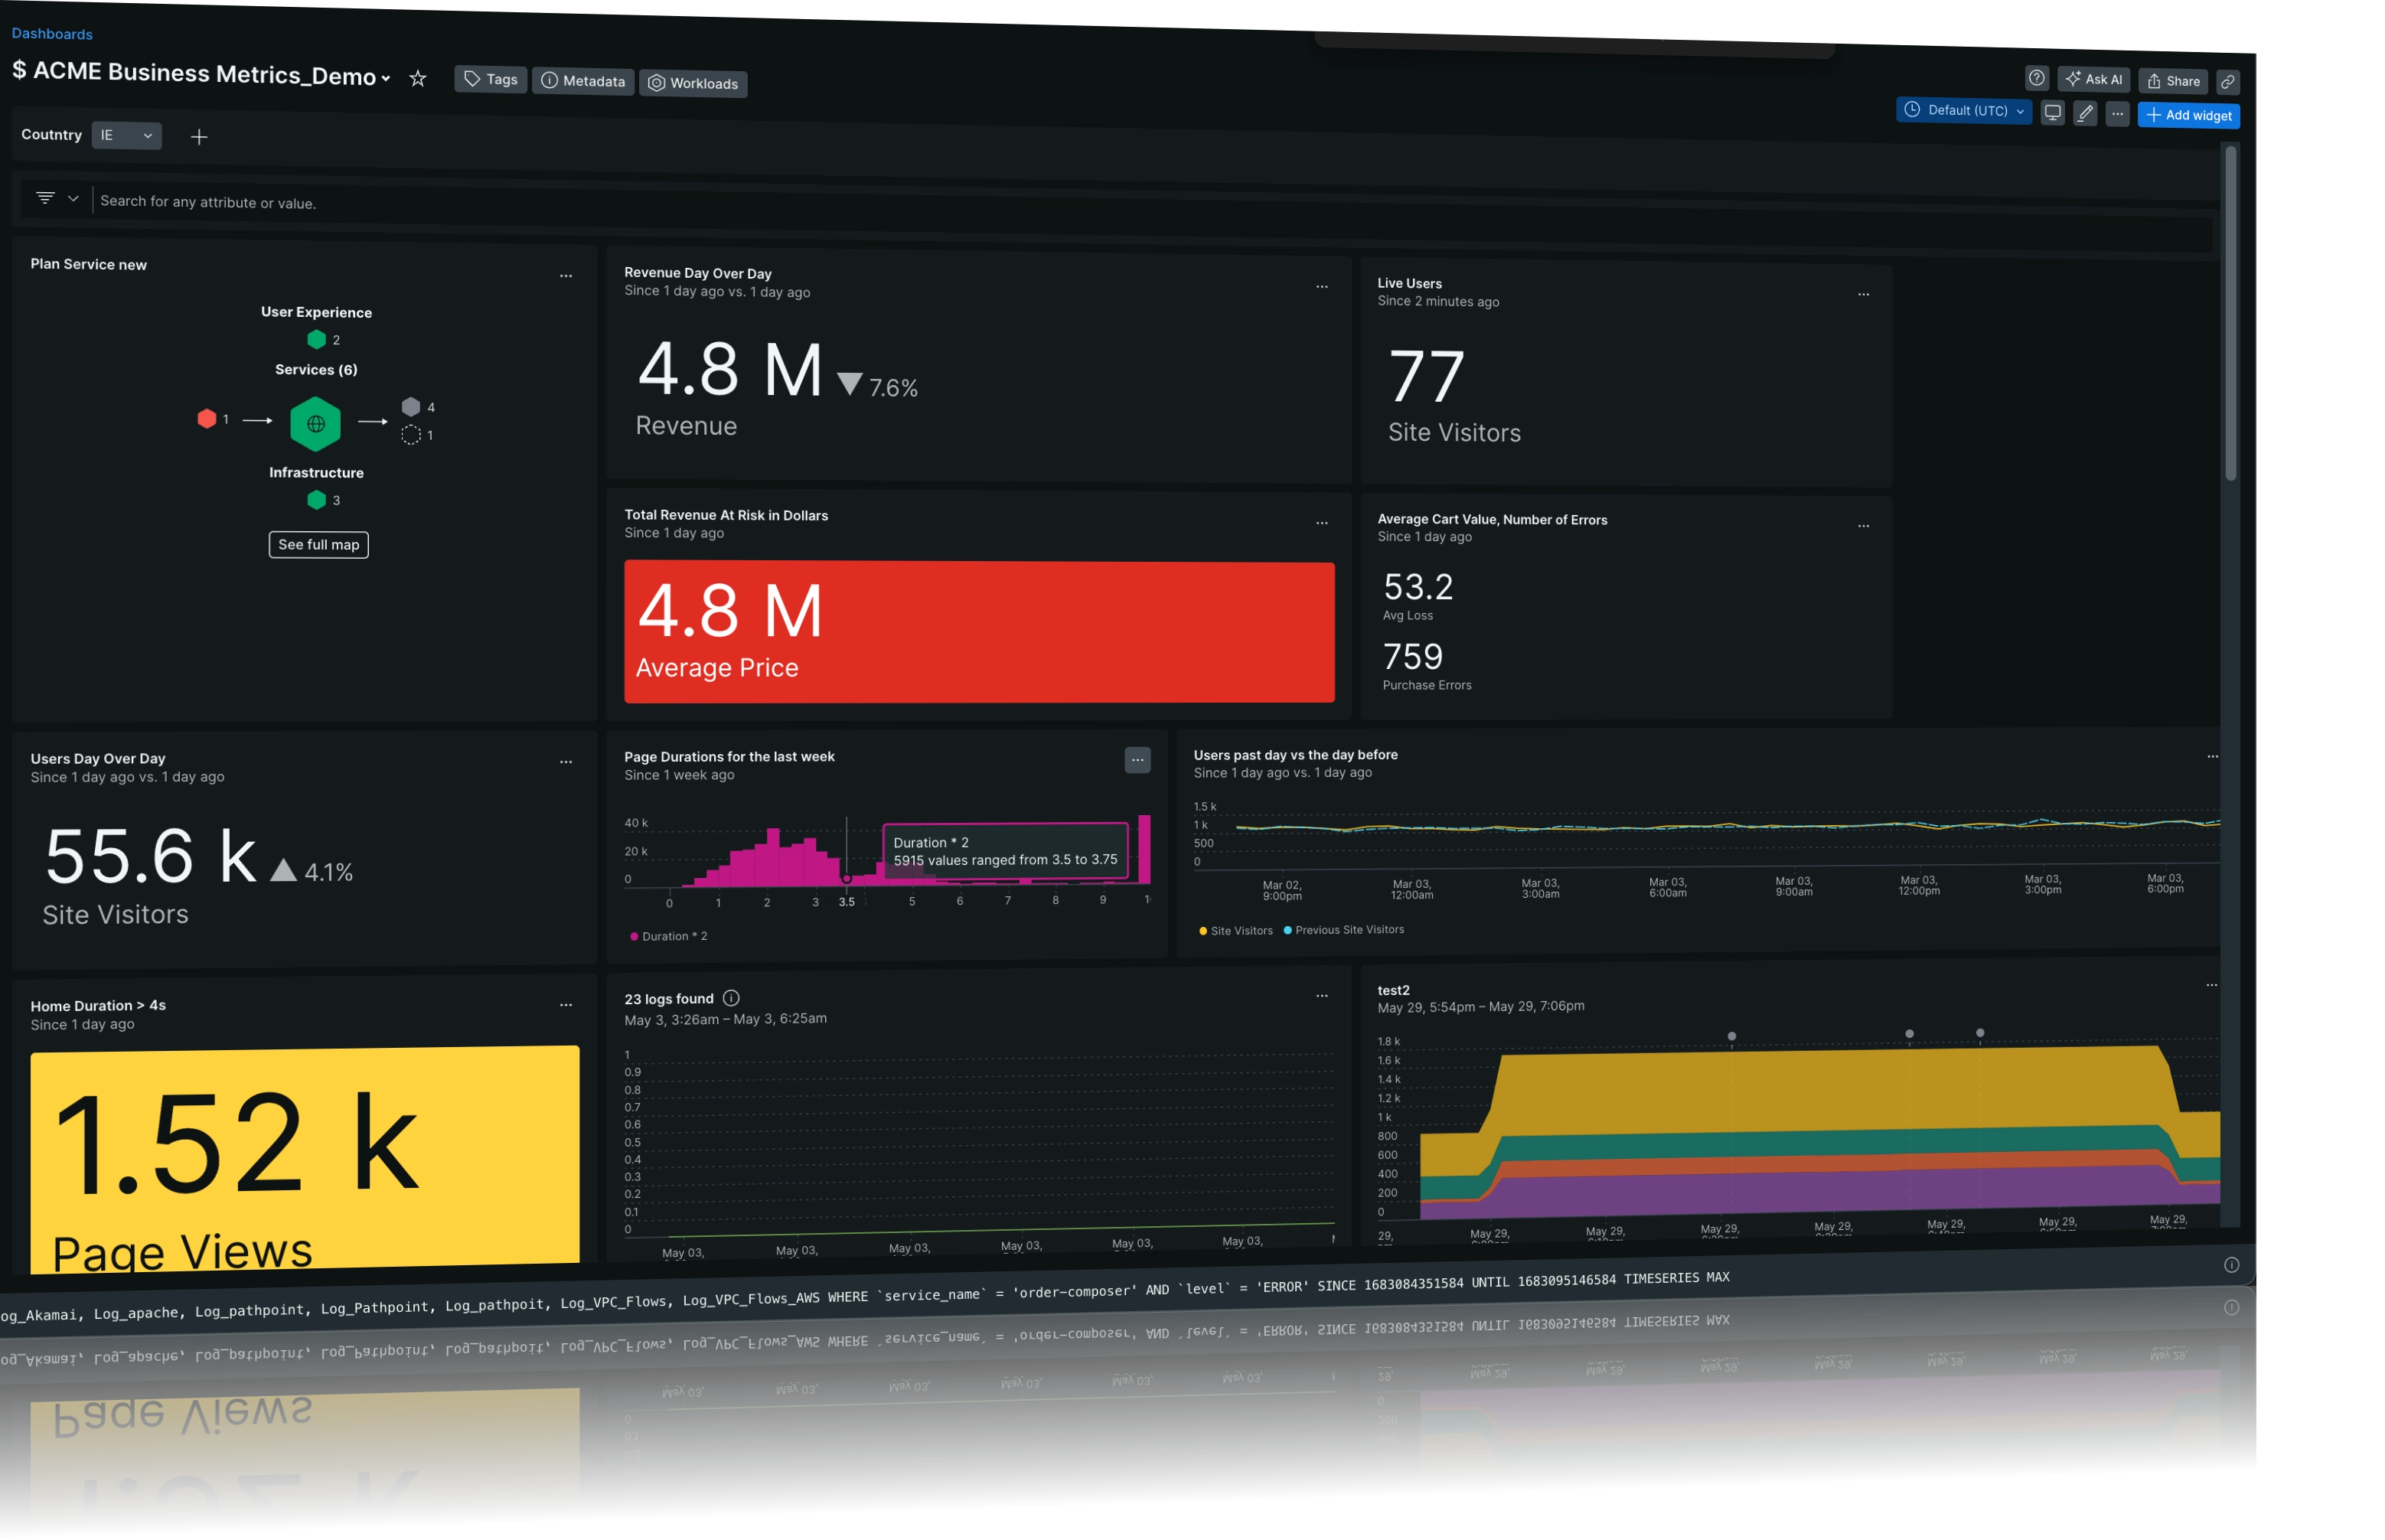 New Relic dashboards